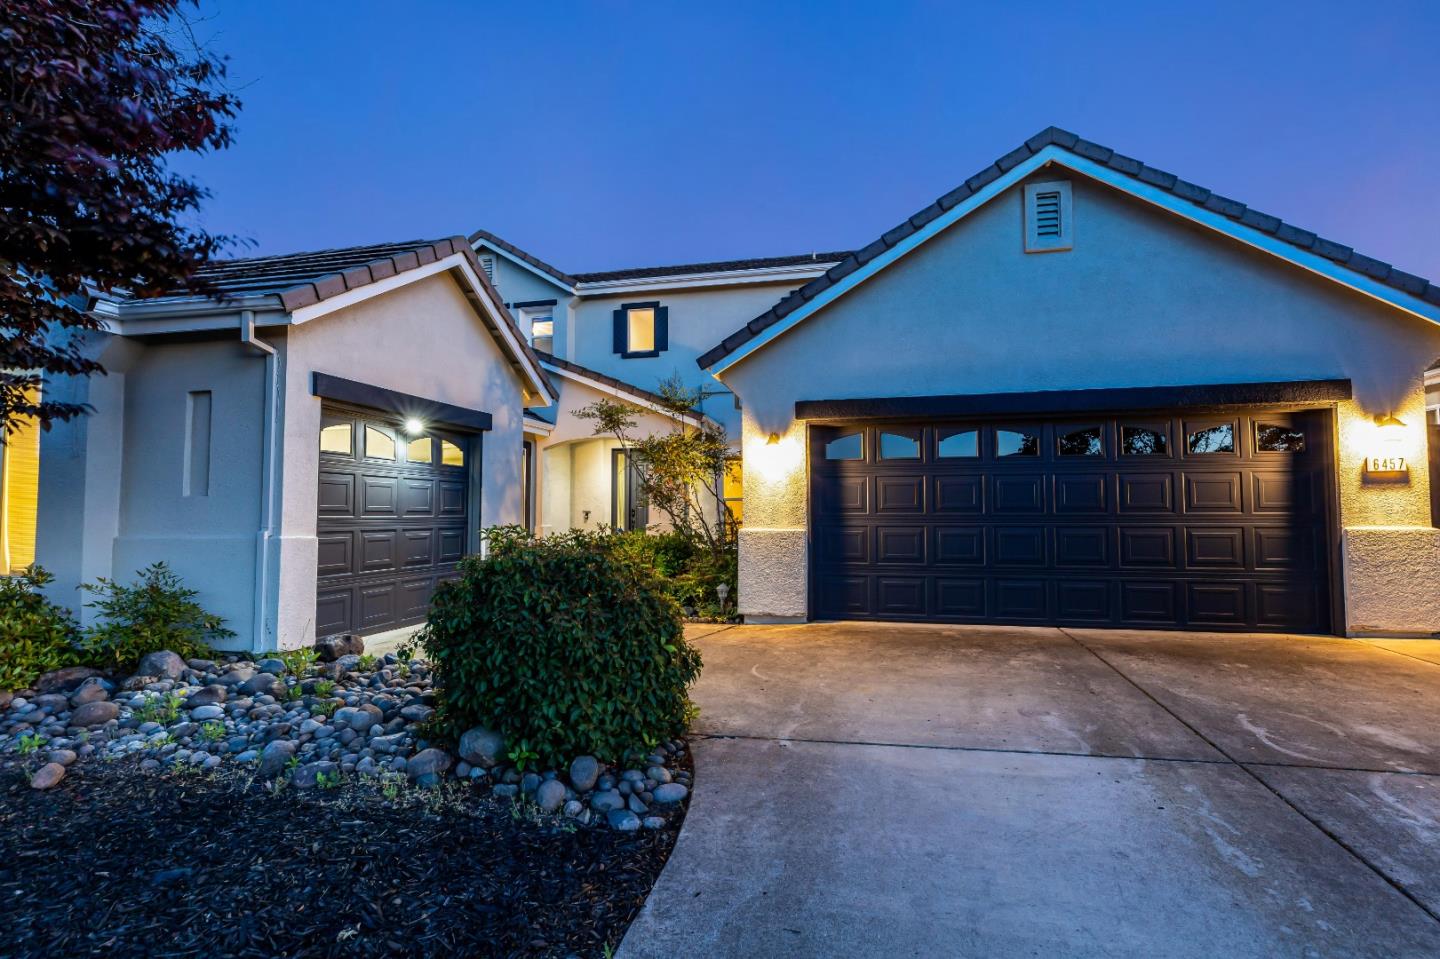 Photo of 6457 Sonora Pass Wy in Rocklin, CA